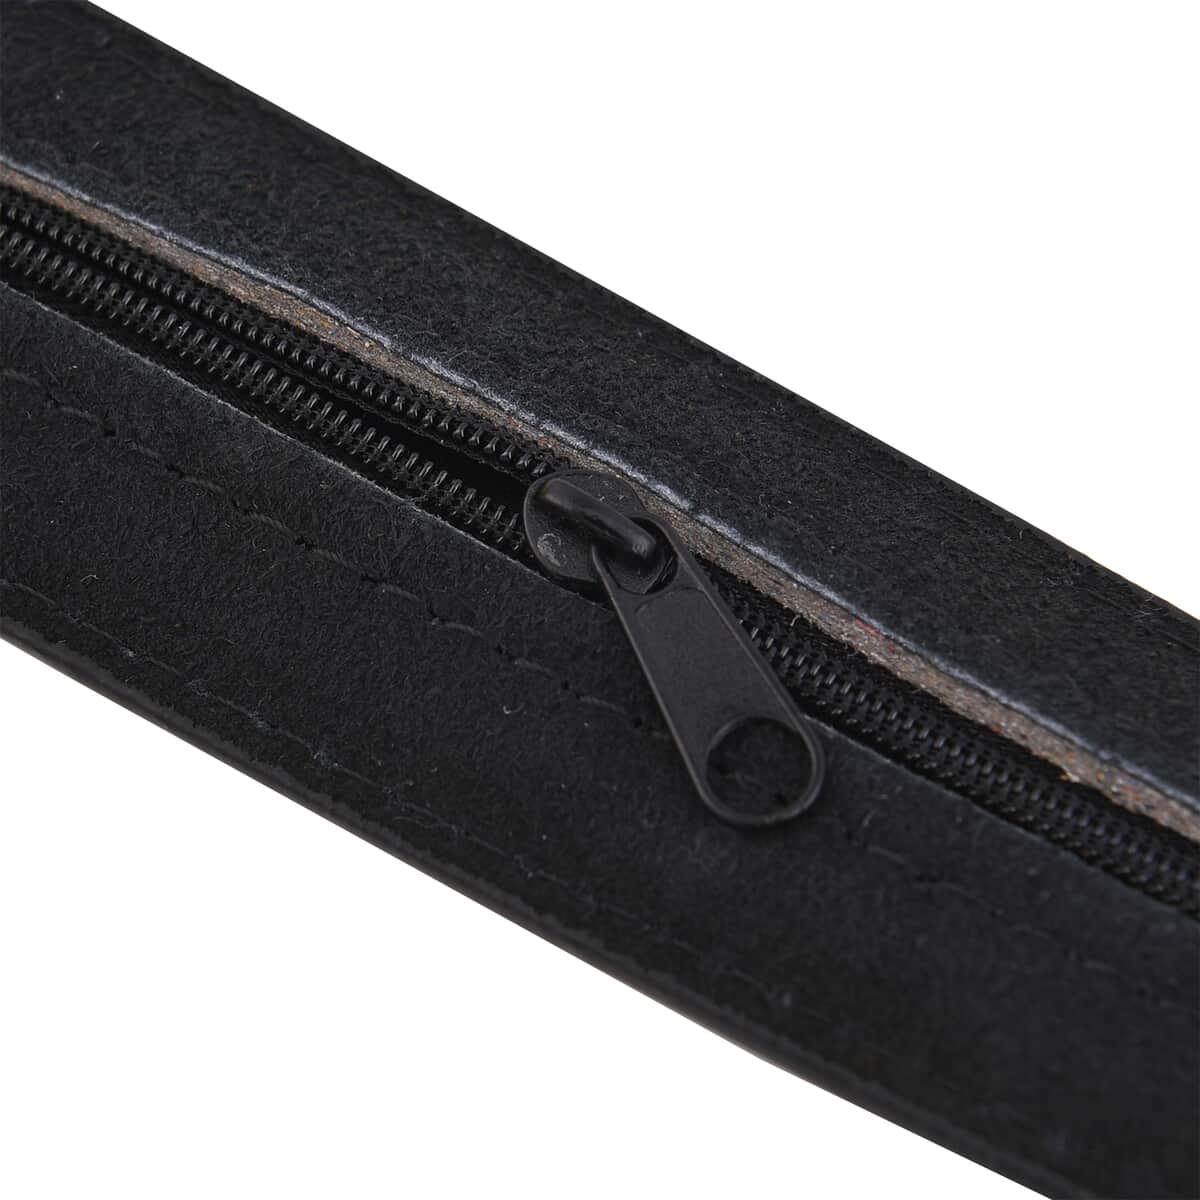 2-in-1 Black Wallet Faux Leather Belt with Hidden Zipper Pocket - L (47-49 Inches) image number 4